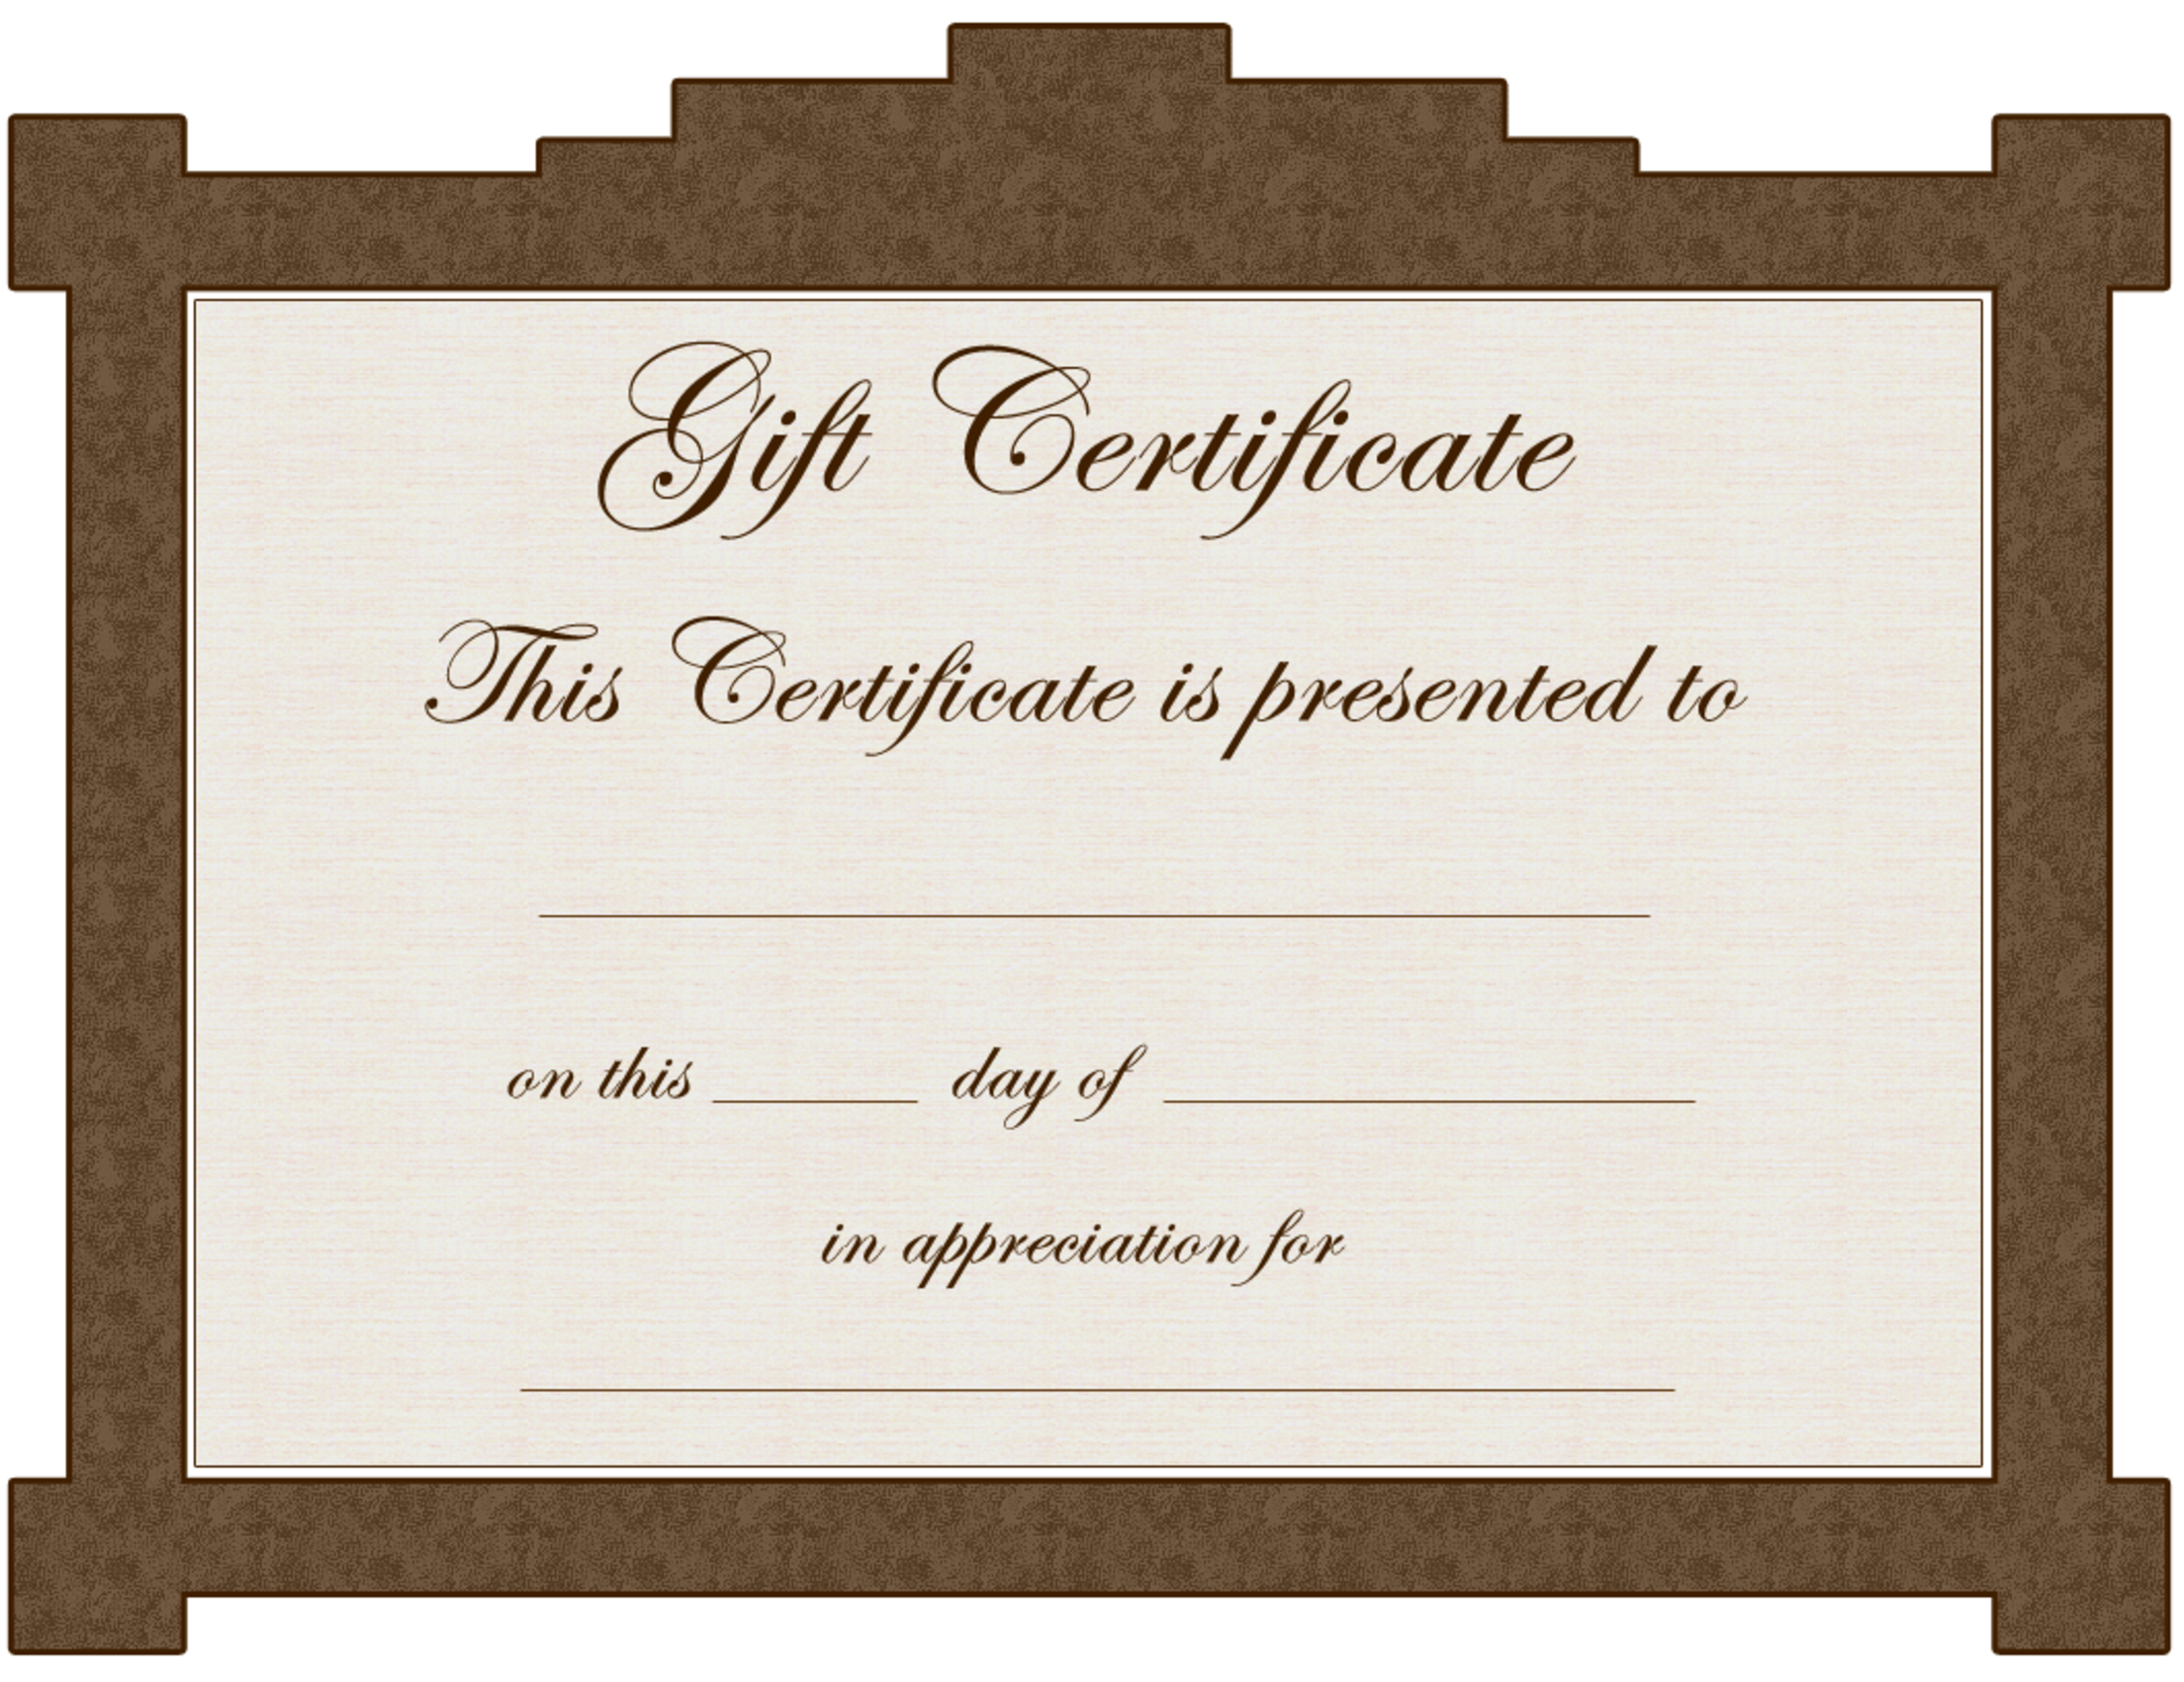 Christmas Tattoo Gift Certificate Template | DIY Printable Gift Voucher Card